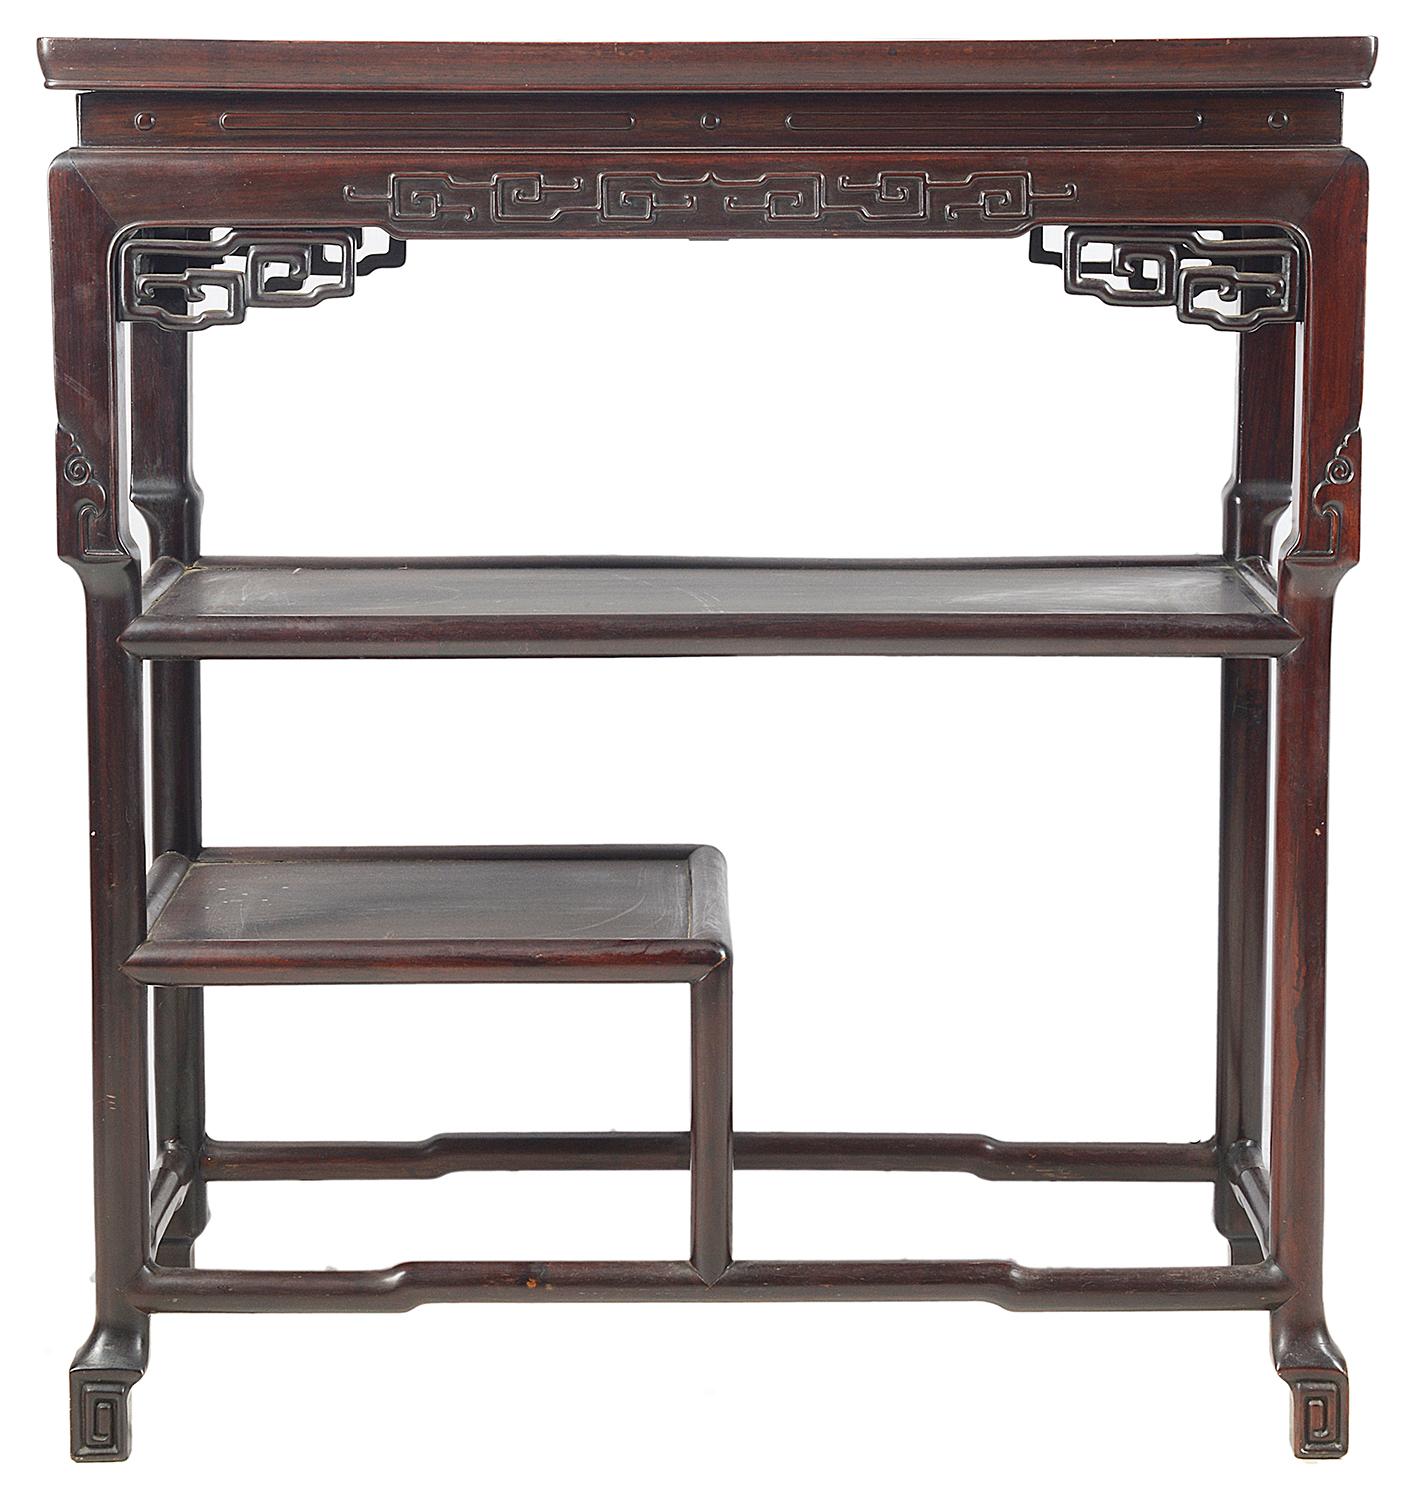 A good quality 19th century Chinese hardwood three tier side table, having carved blind fret work to the frieze, carved fretwok brackets and two shelves beneath.